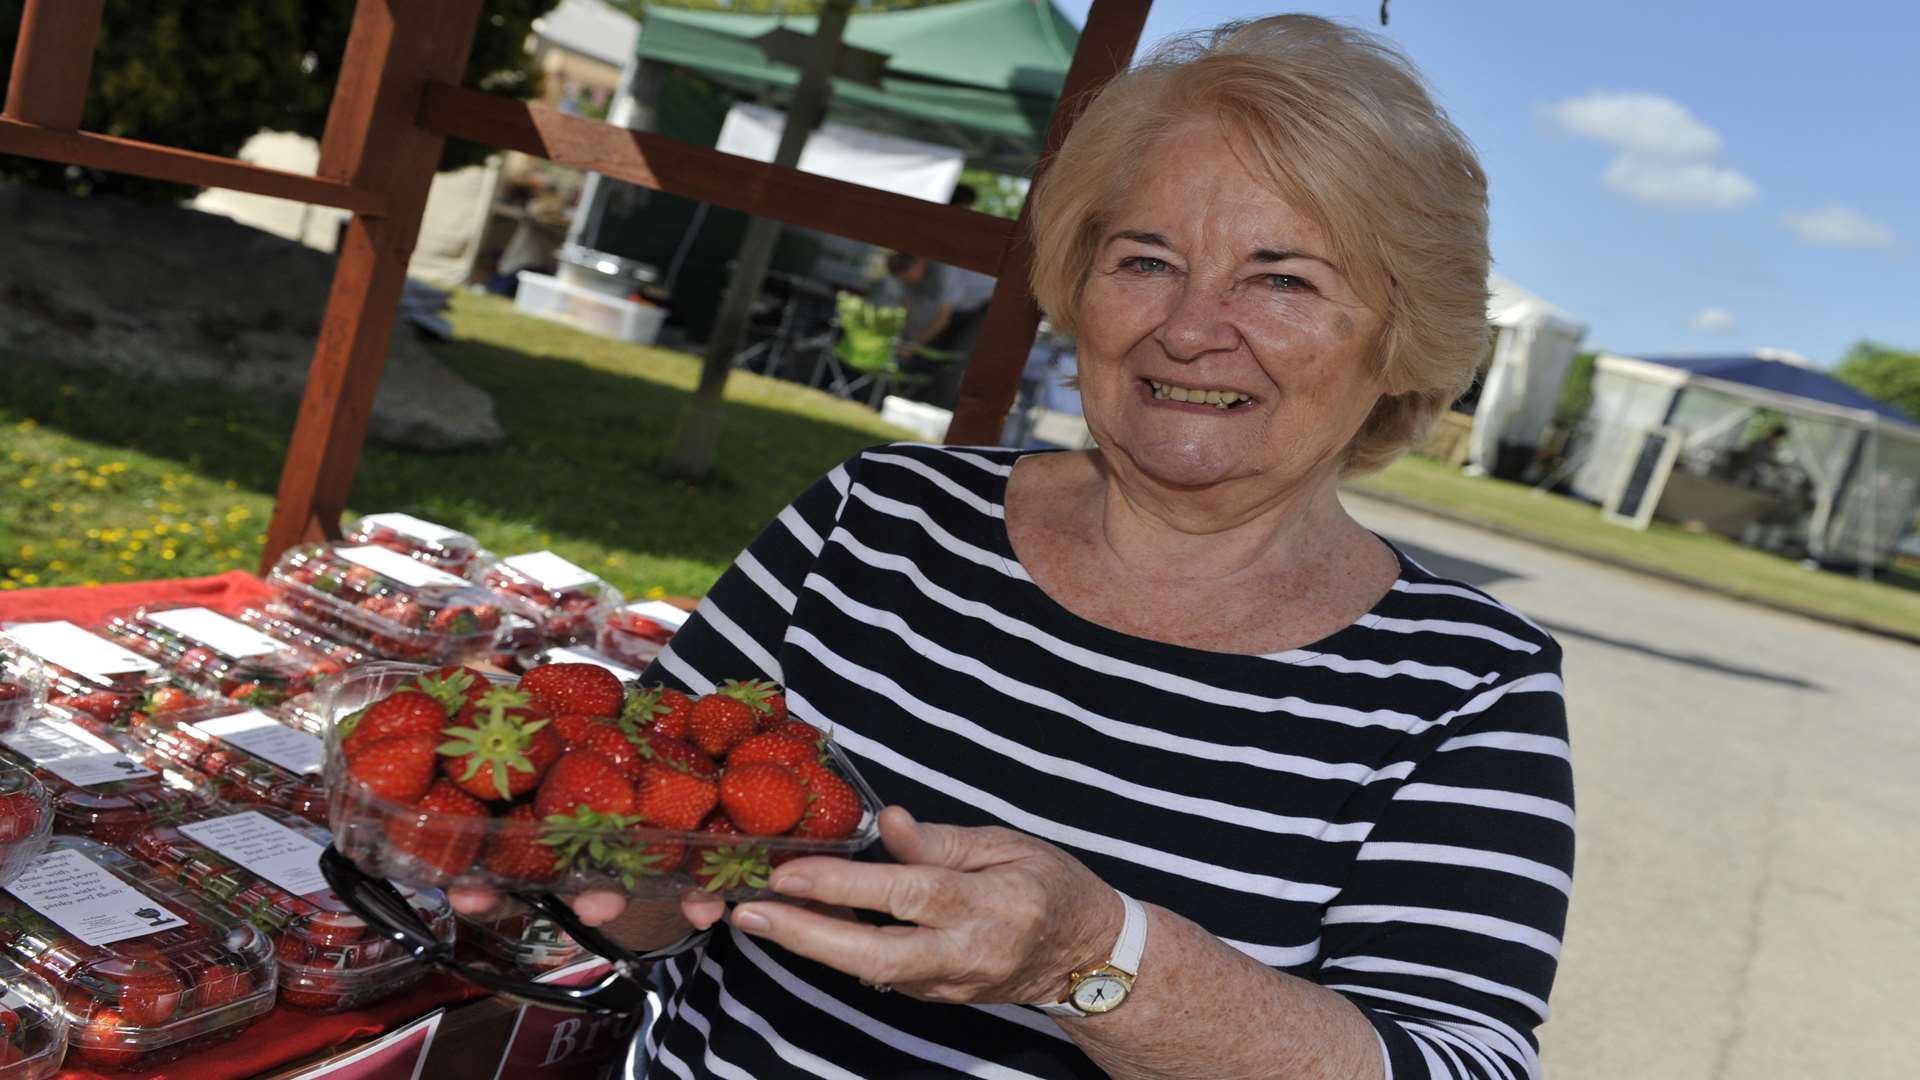 Taste the first fruit of the season at Brogdale's Strawberry Festival - like Janice Wells. Picture: Tony Flashman